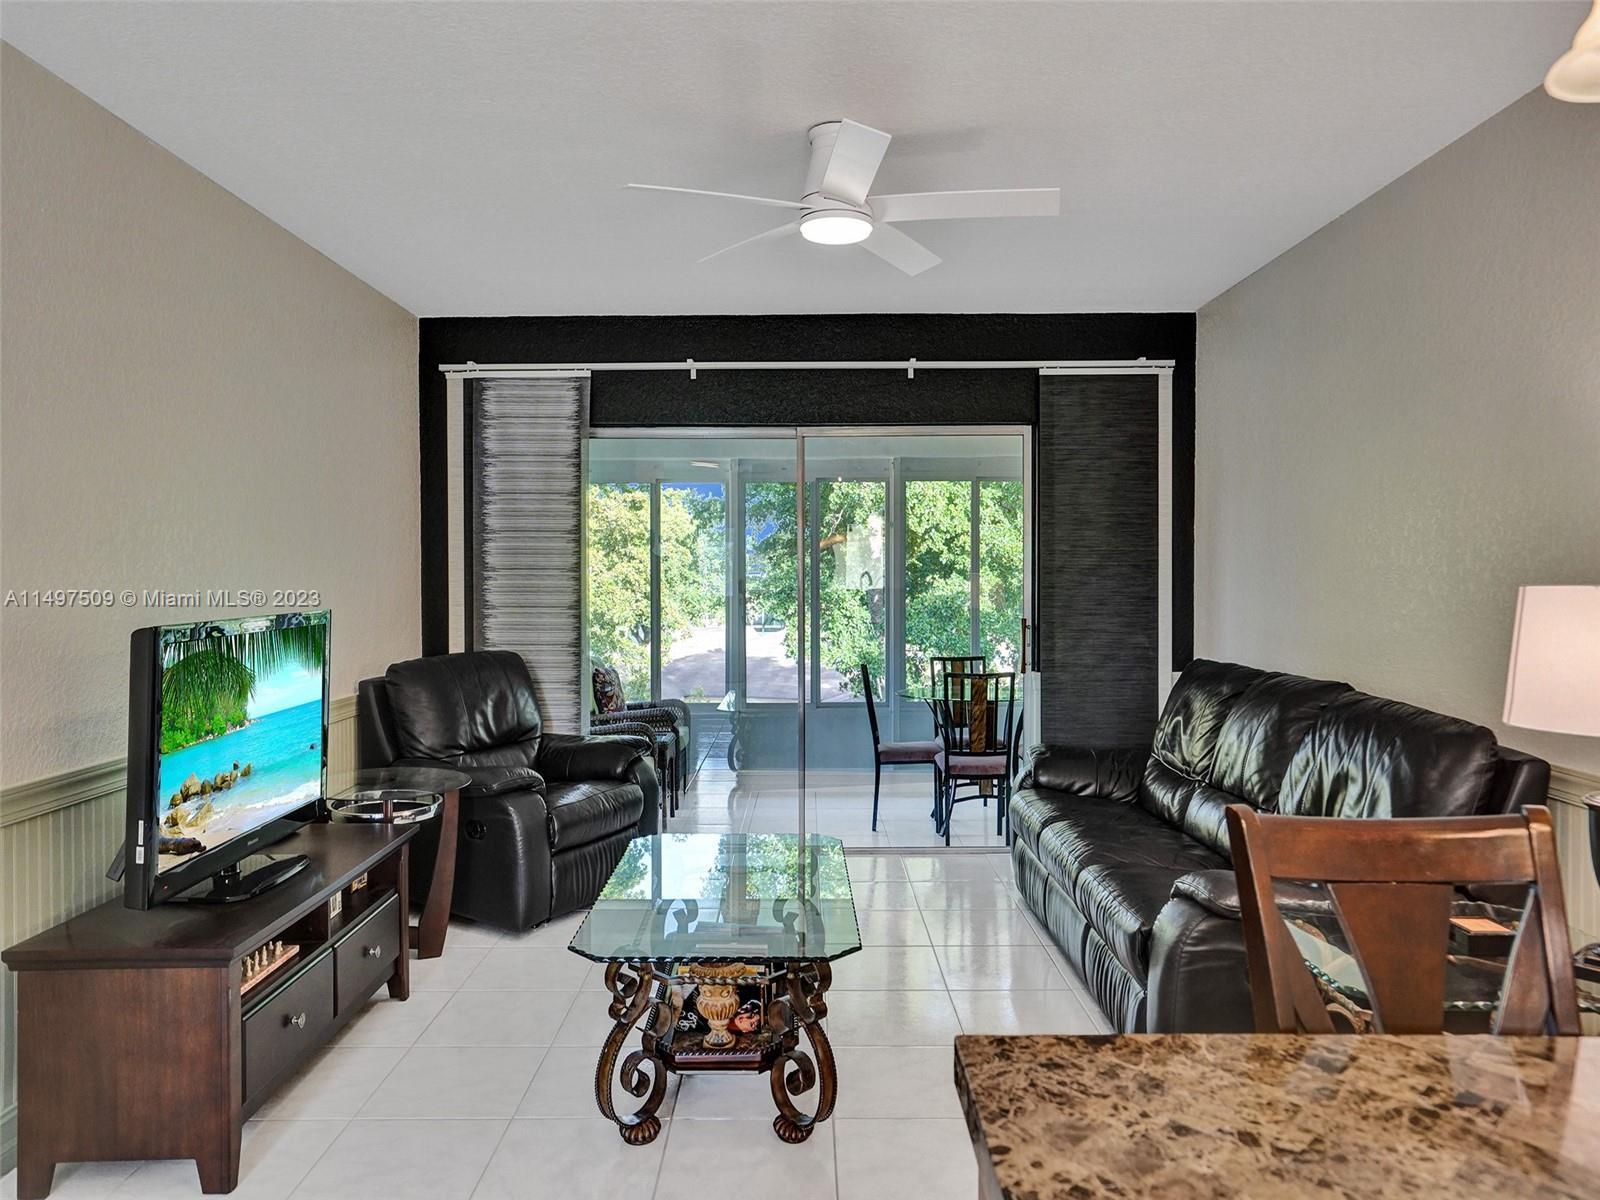 Photo of 5131 W Oakland Park Blvd #312 in Lauderdale Lakes, FL